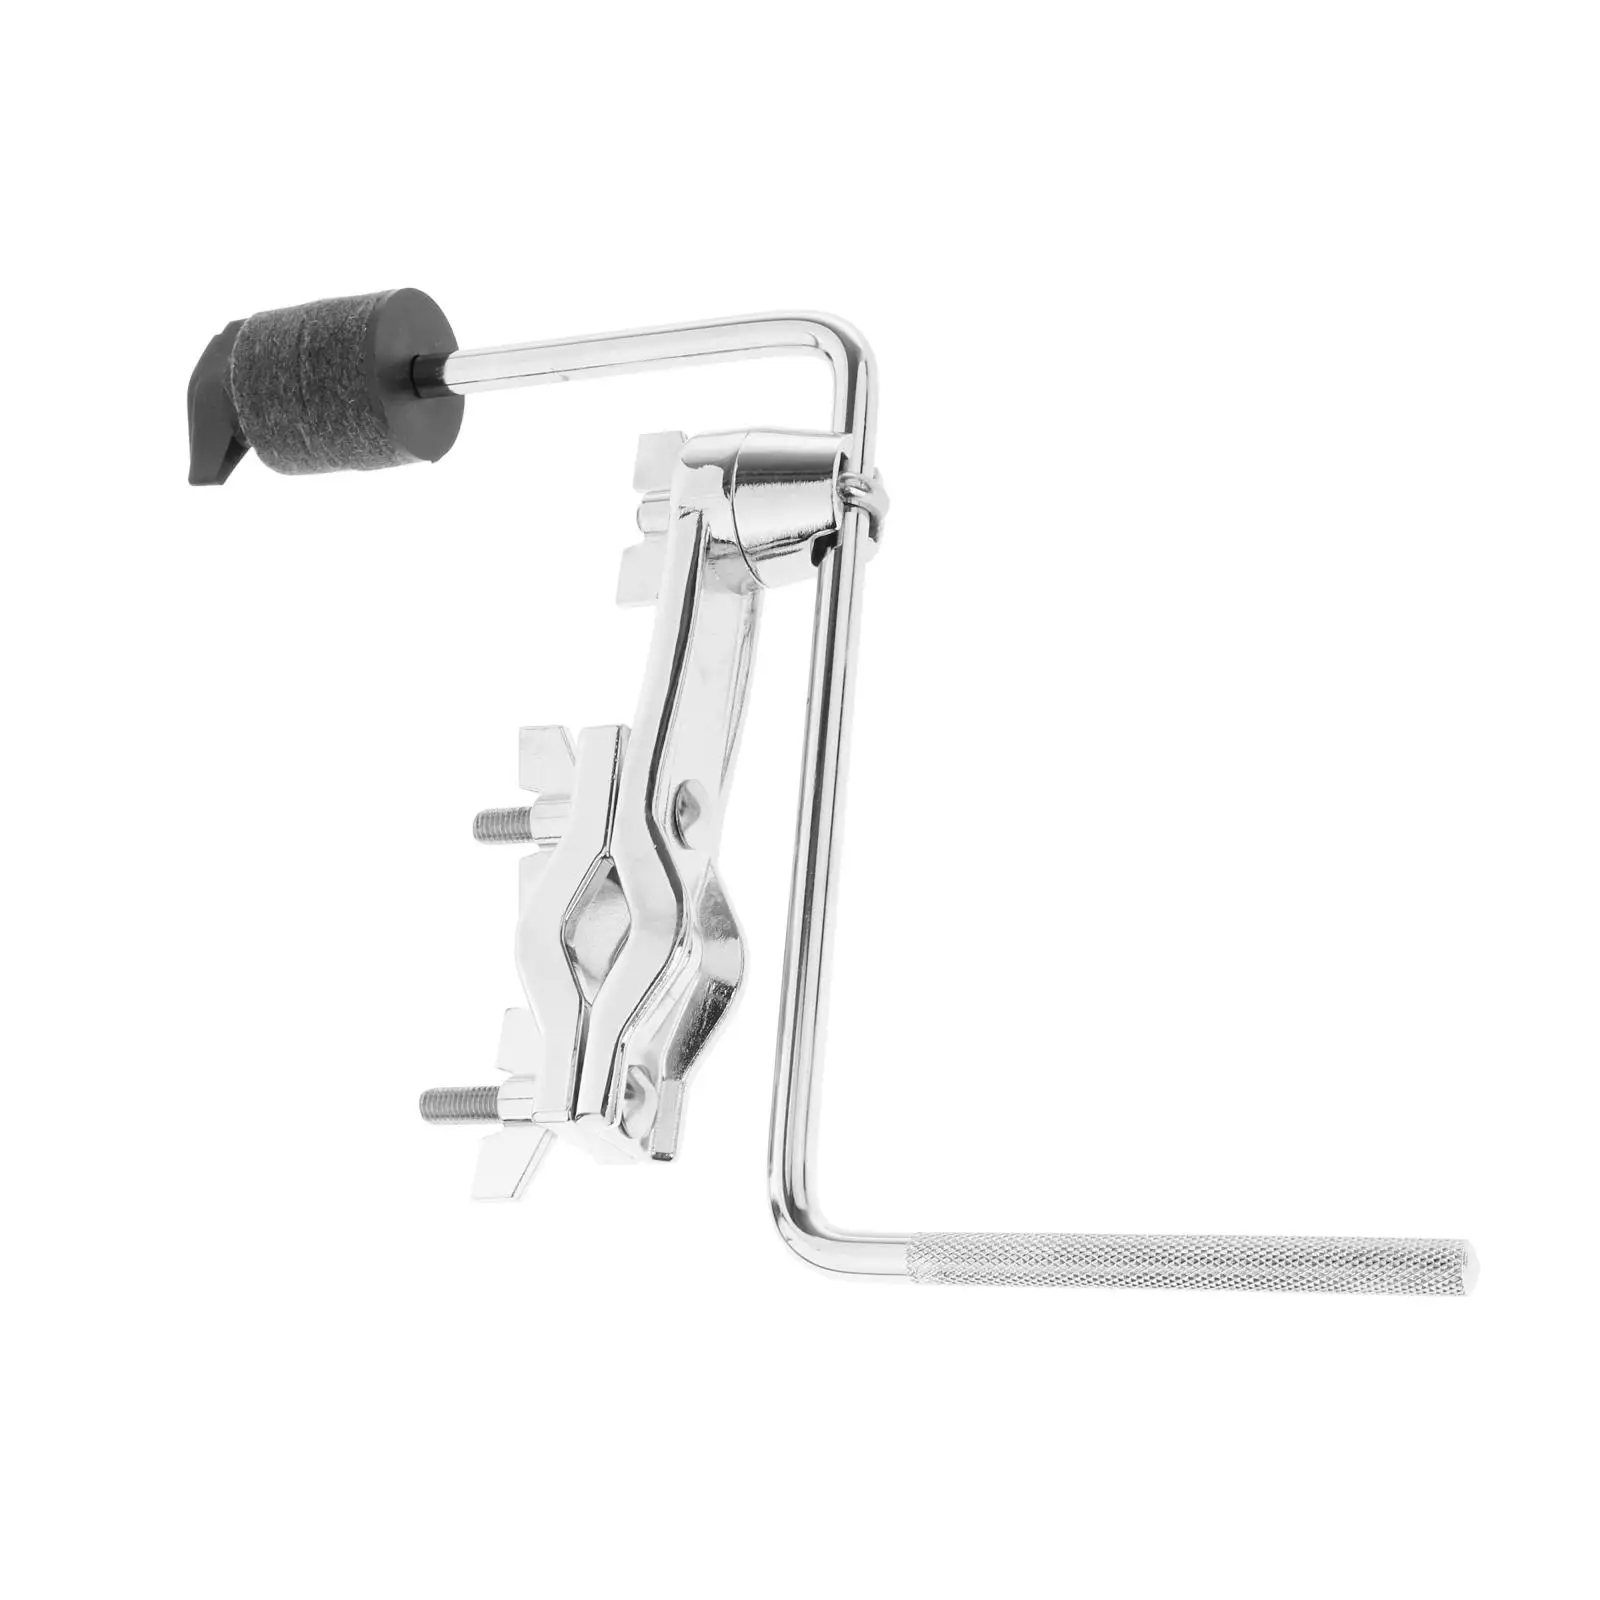 Cymbal Stacker Attachment with Solid Boom Arm Cymbal Stand Holder for Drum Hardware Boom Set Accessories Drum Arm Holder